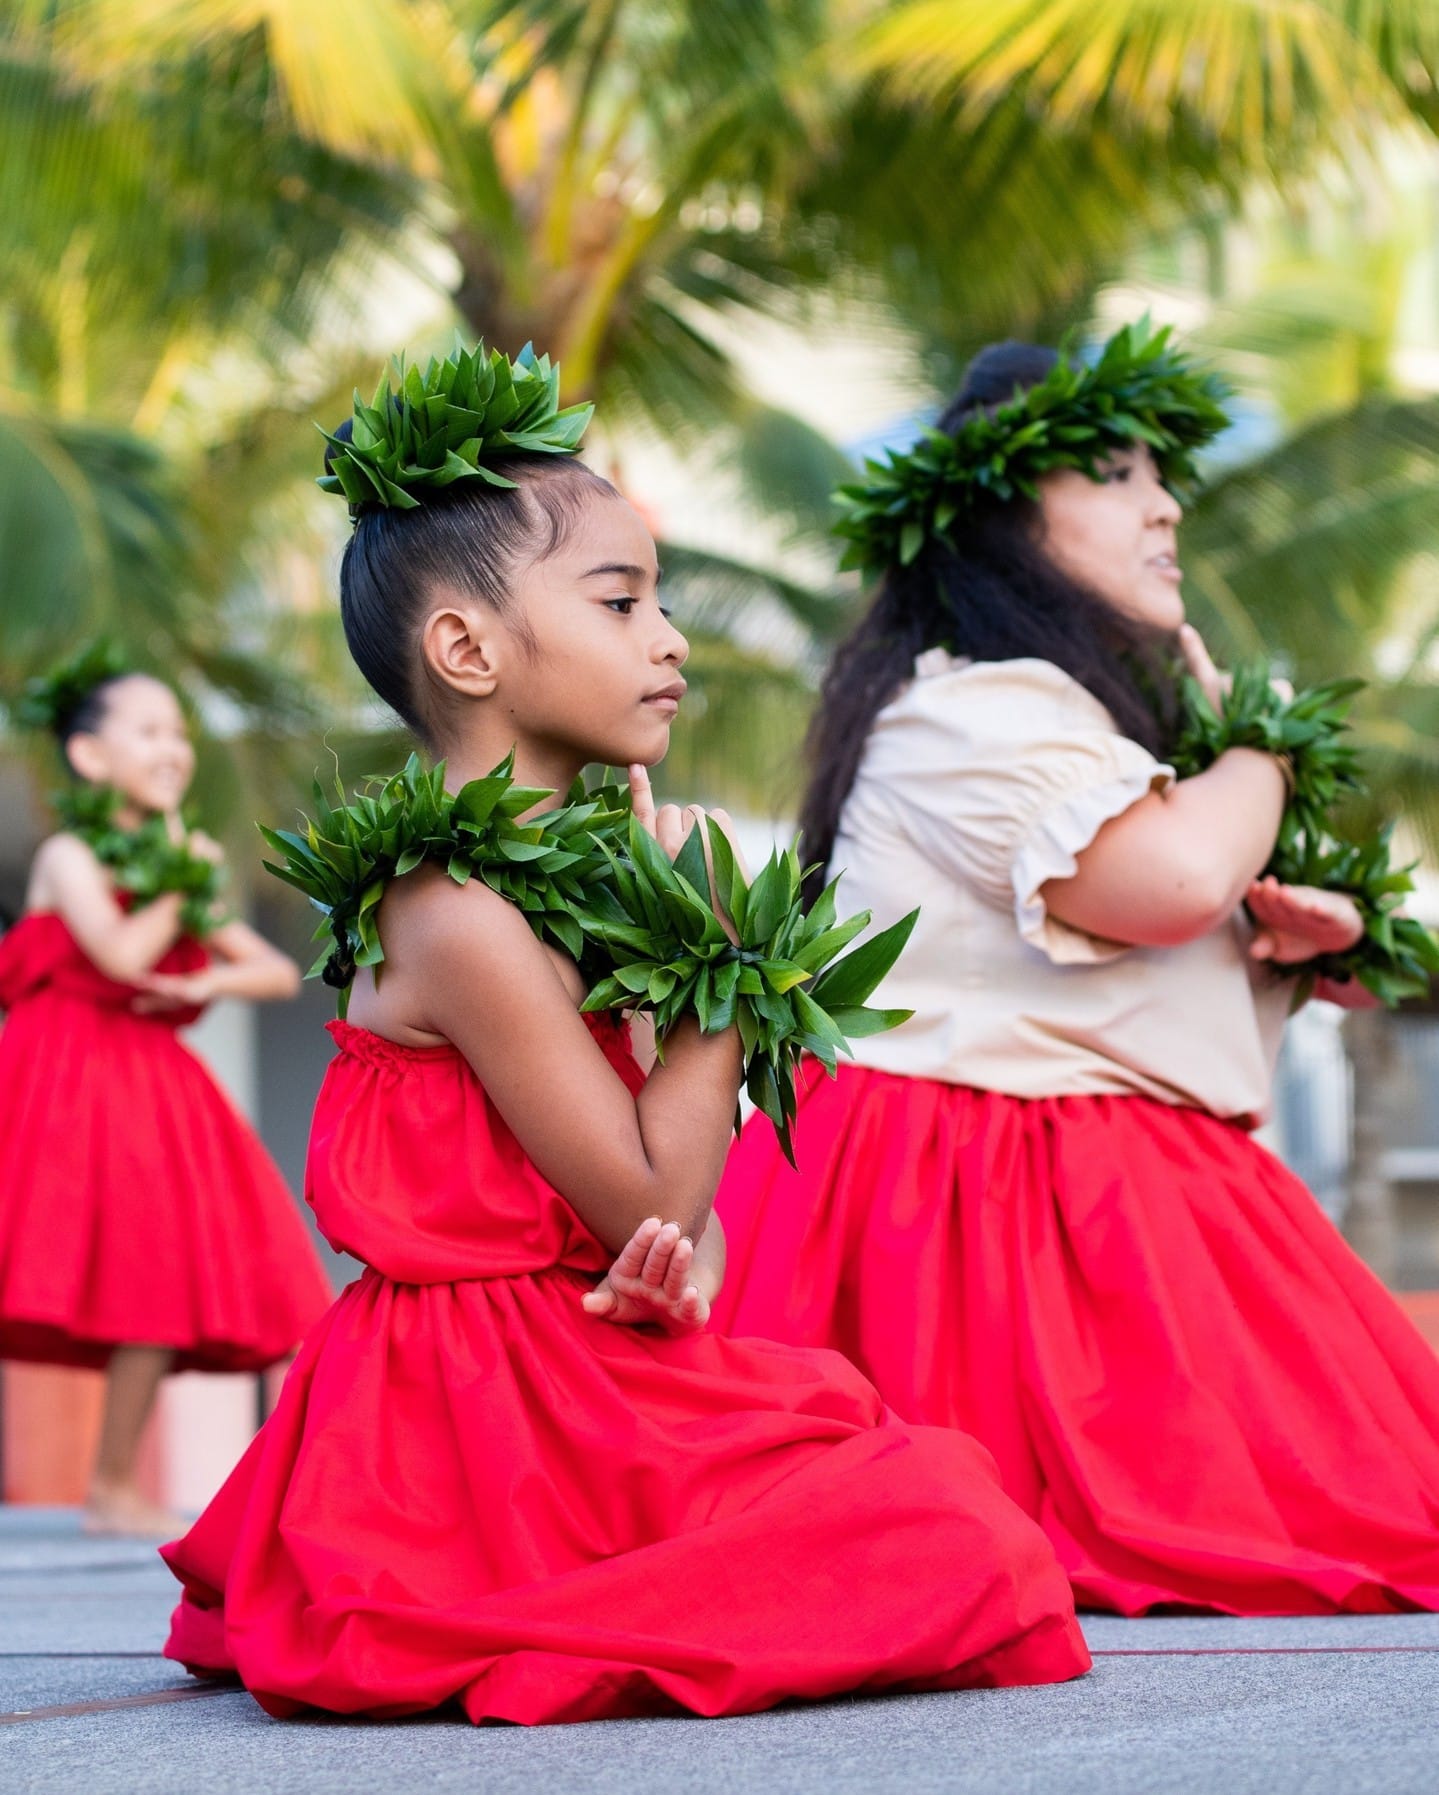 Join us for our next Kona Nui Nights on October 5 from 6pm – 8pm in Victoria Ward Park. Bring a blanket or chair and picnic on grab-and-go offerings from local eateries. The evening will feature live music by The Mākaha Sons and a celebration of hula and storytelling by Halau Kawaiʻulaokalā, Kumu Hula Keli’iho’omalu Puchalski.